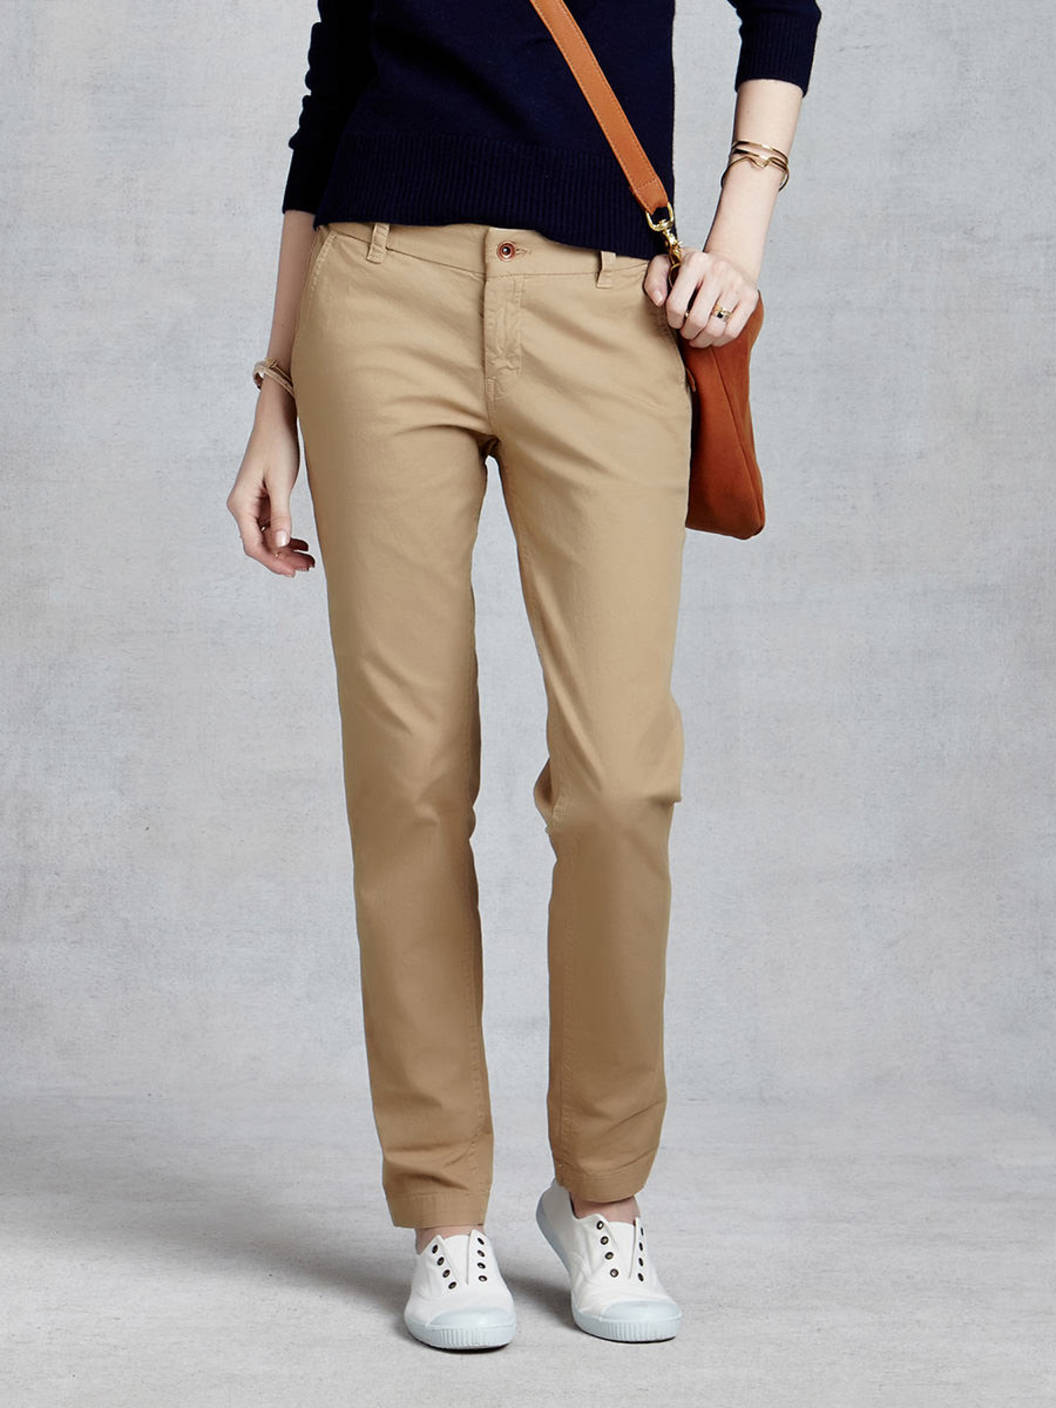 Reasons why you should get women chinos pant today â StyleSkier.com